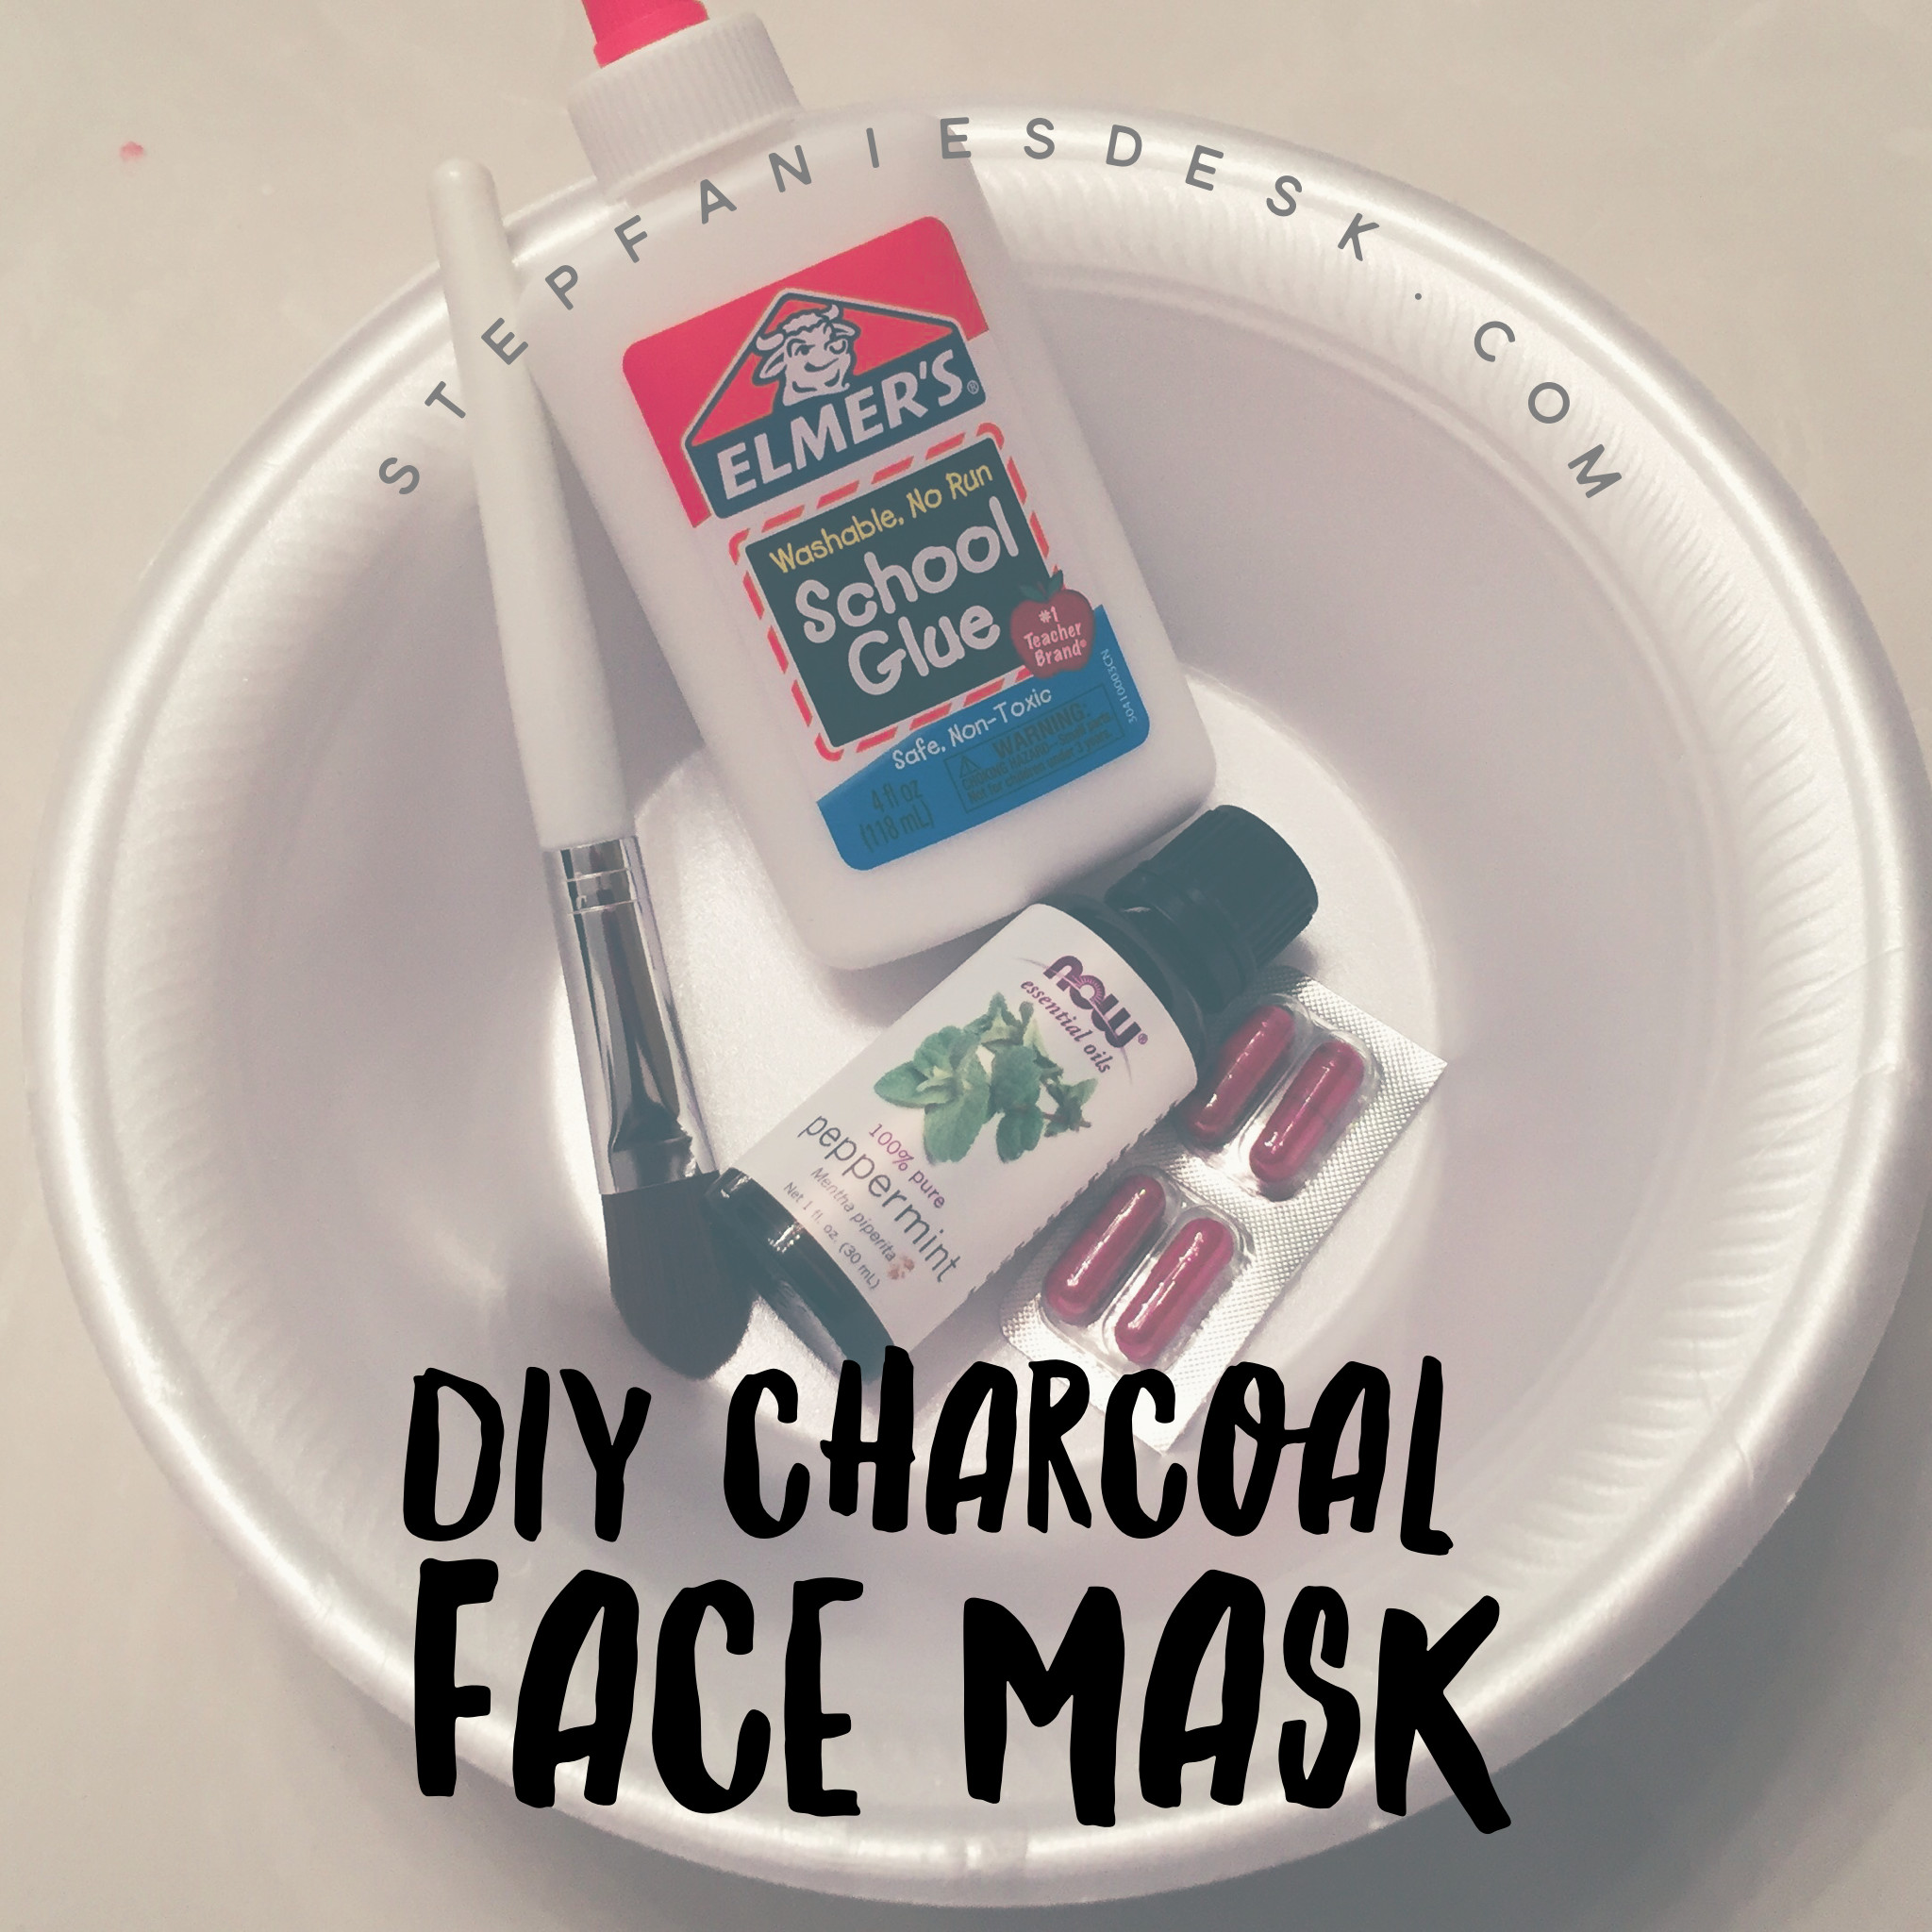 DIY Face Mask With Glue
 DIY Charcoal Face Mask